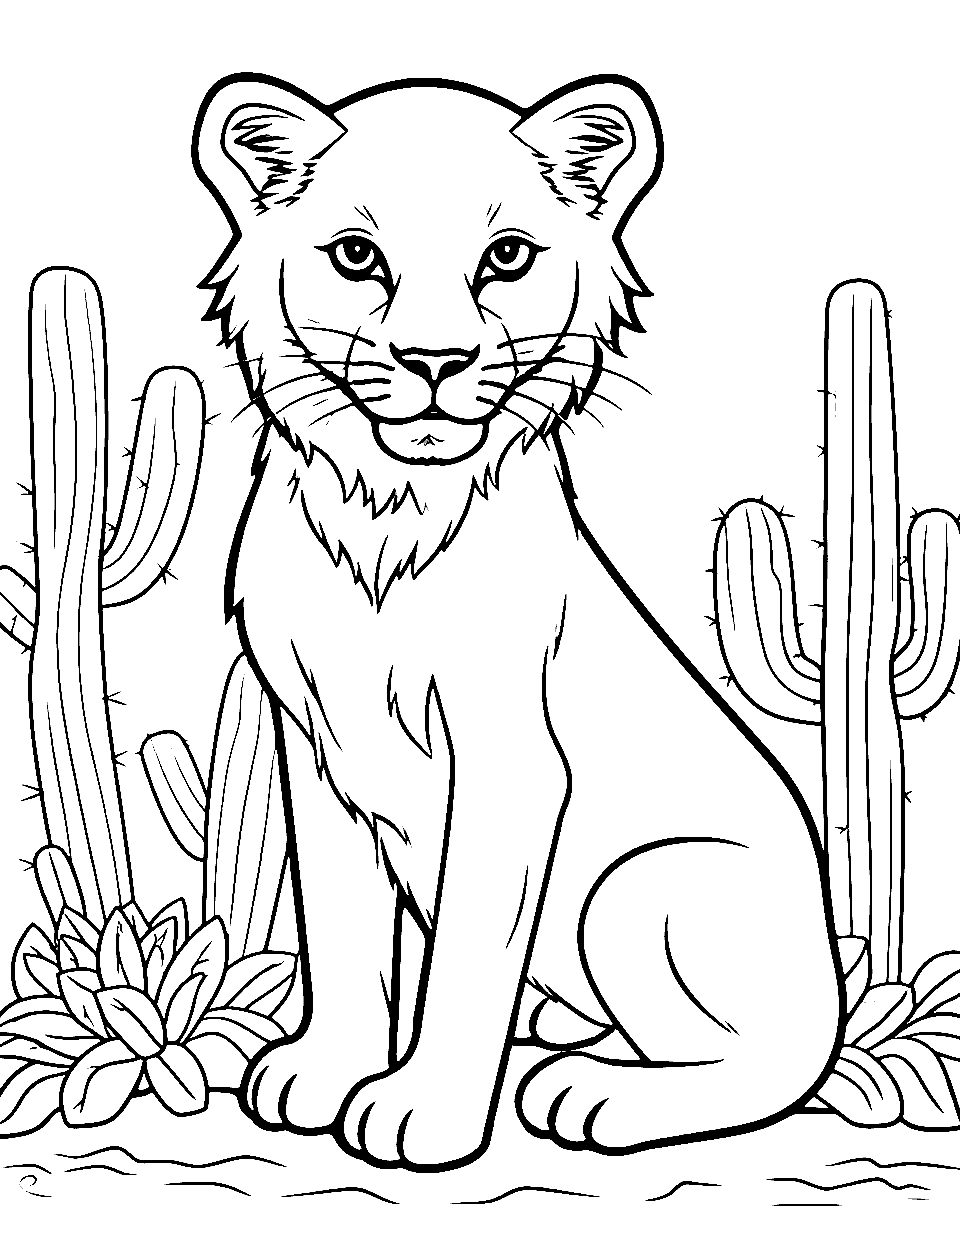 Desert Lion Coloring Page - A lion with desert cactus in a sandy environment.